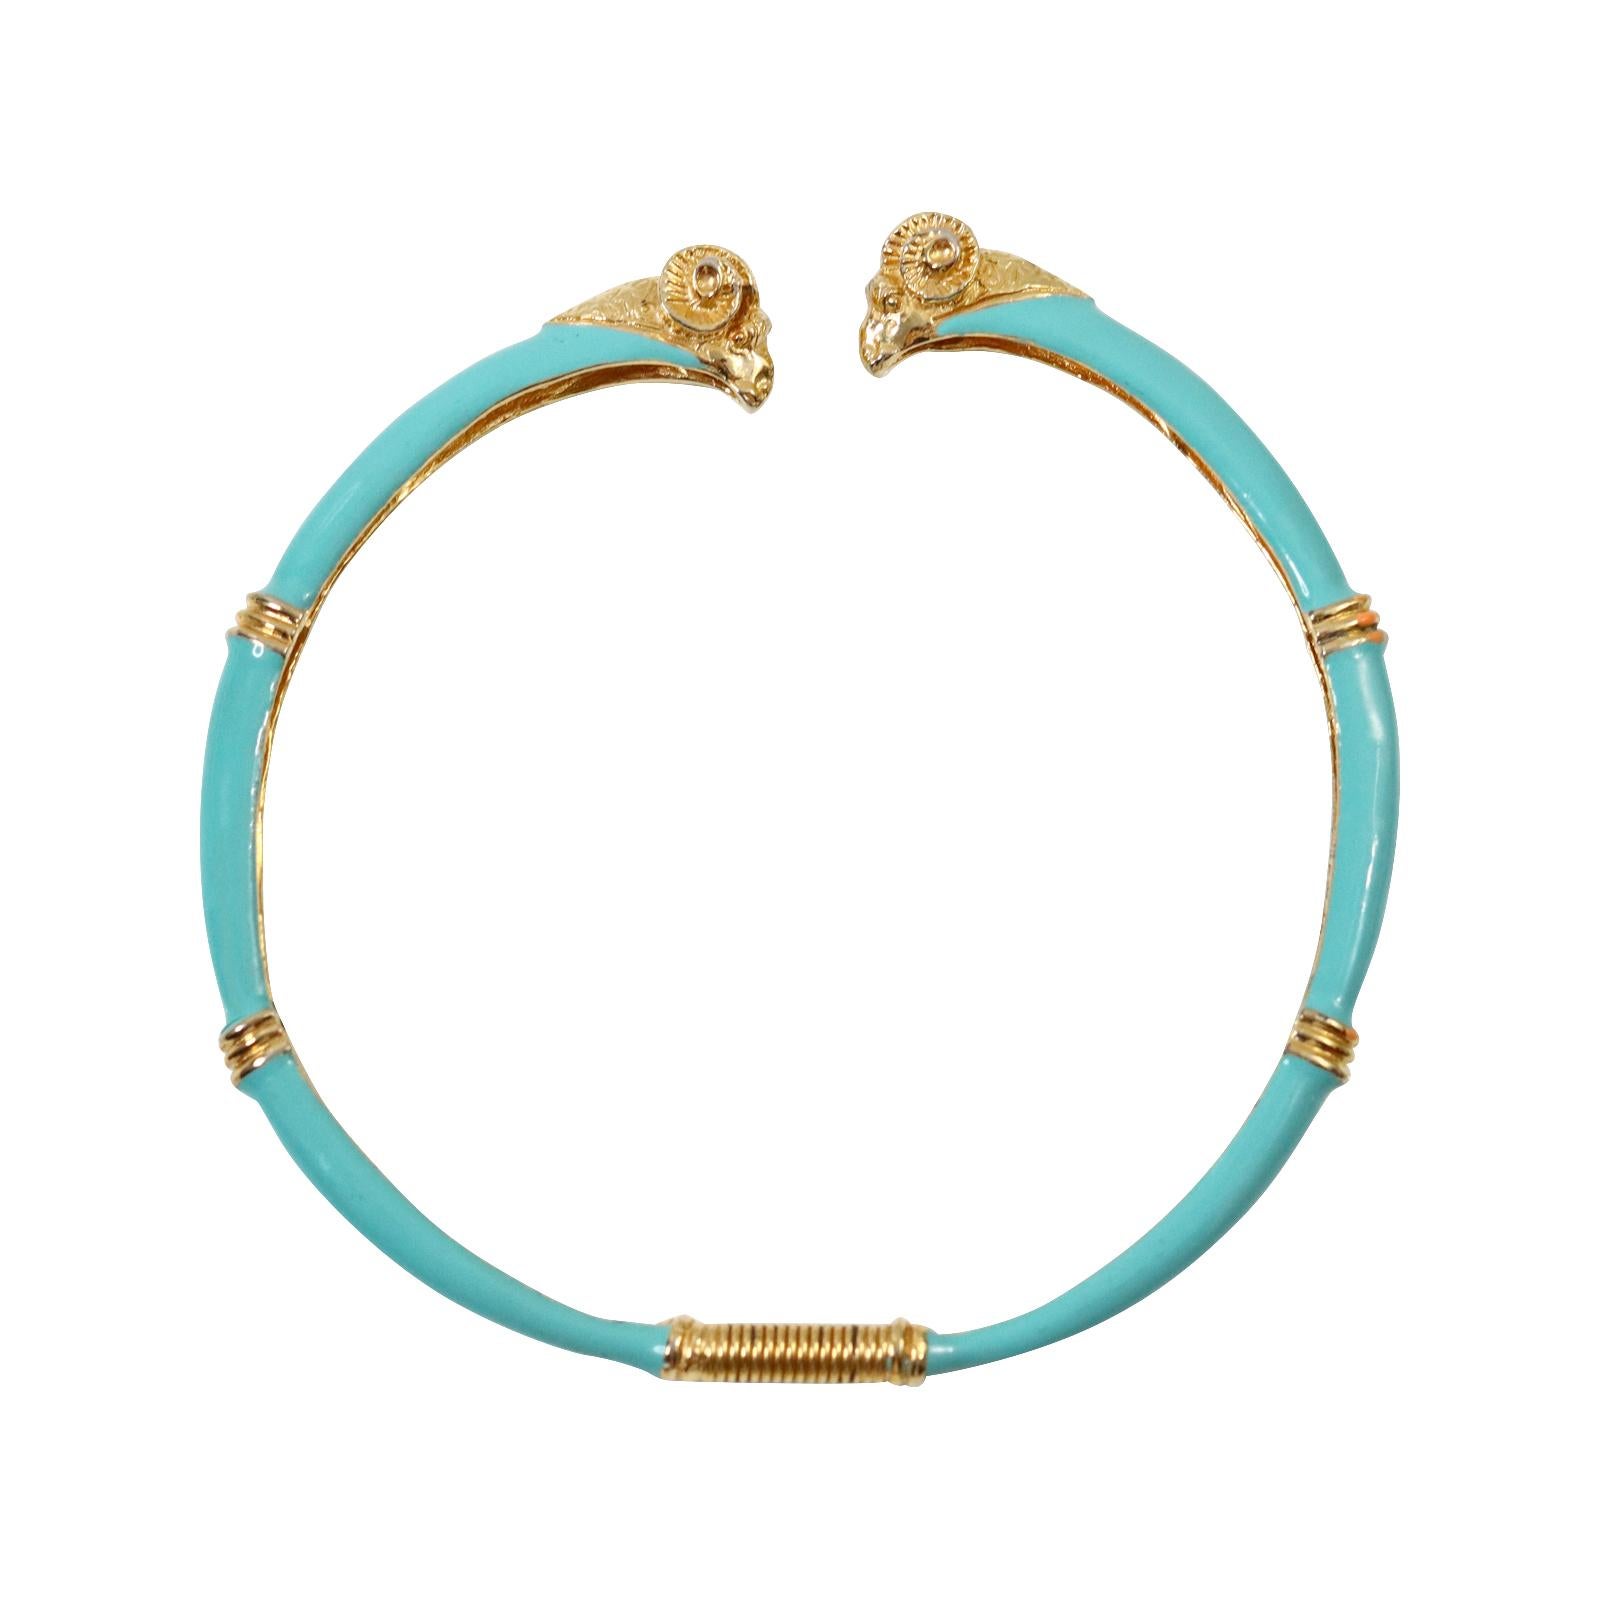 Vintage Donald Stannard Rams Head Choker in Turquoise and Gold Circa 1980s. Classic Rams head necklace in a color that I have never seen.  This is a classic style that has been around since the beginning of time.  There are examples in the